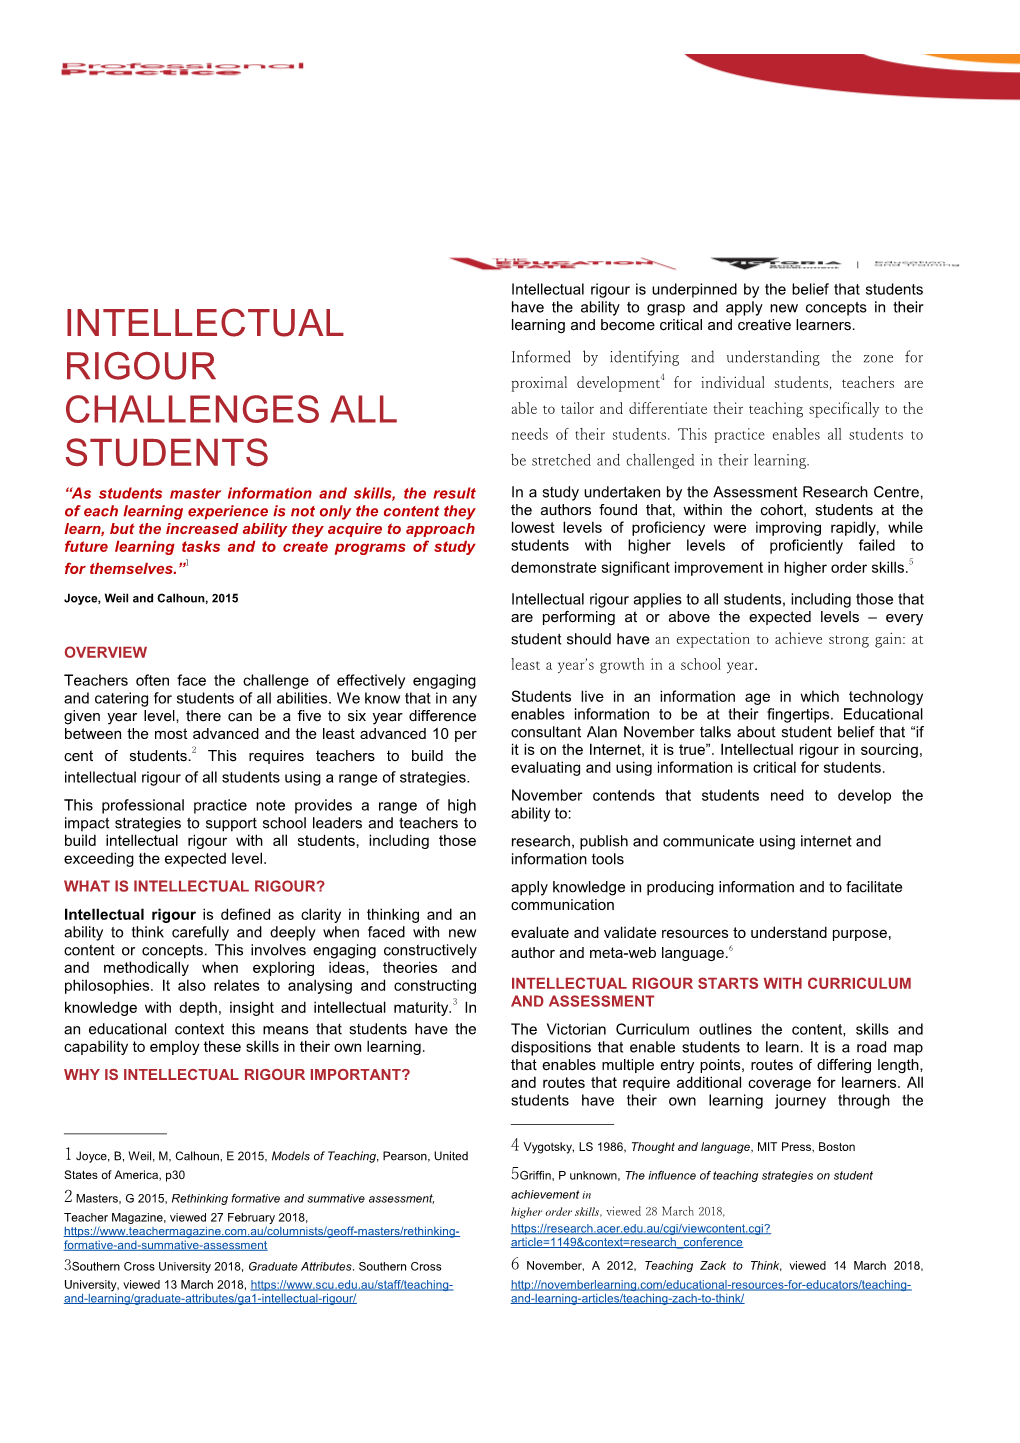 Intellectual Rigour CHALLENGES All Students